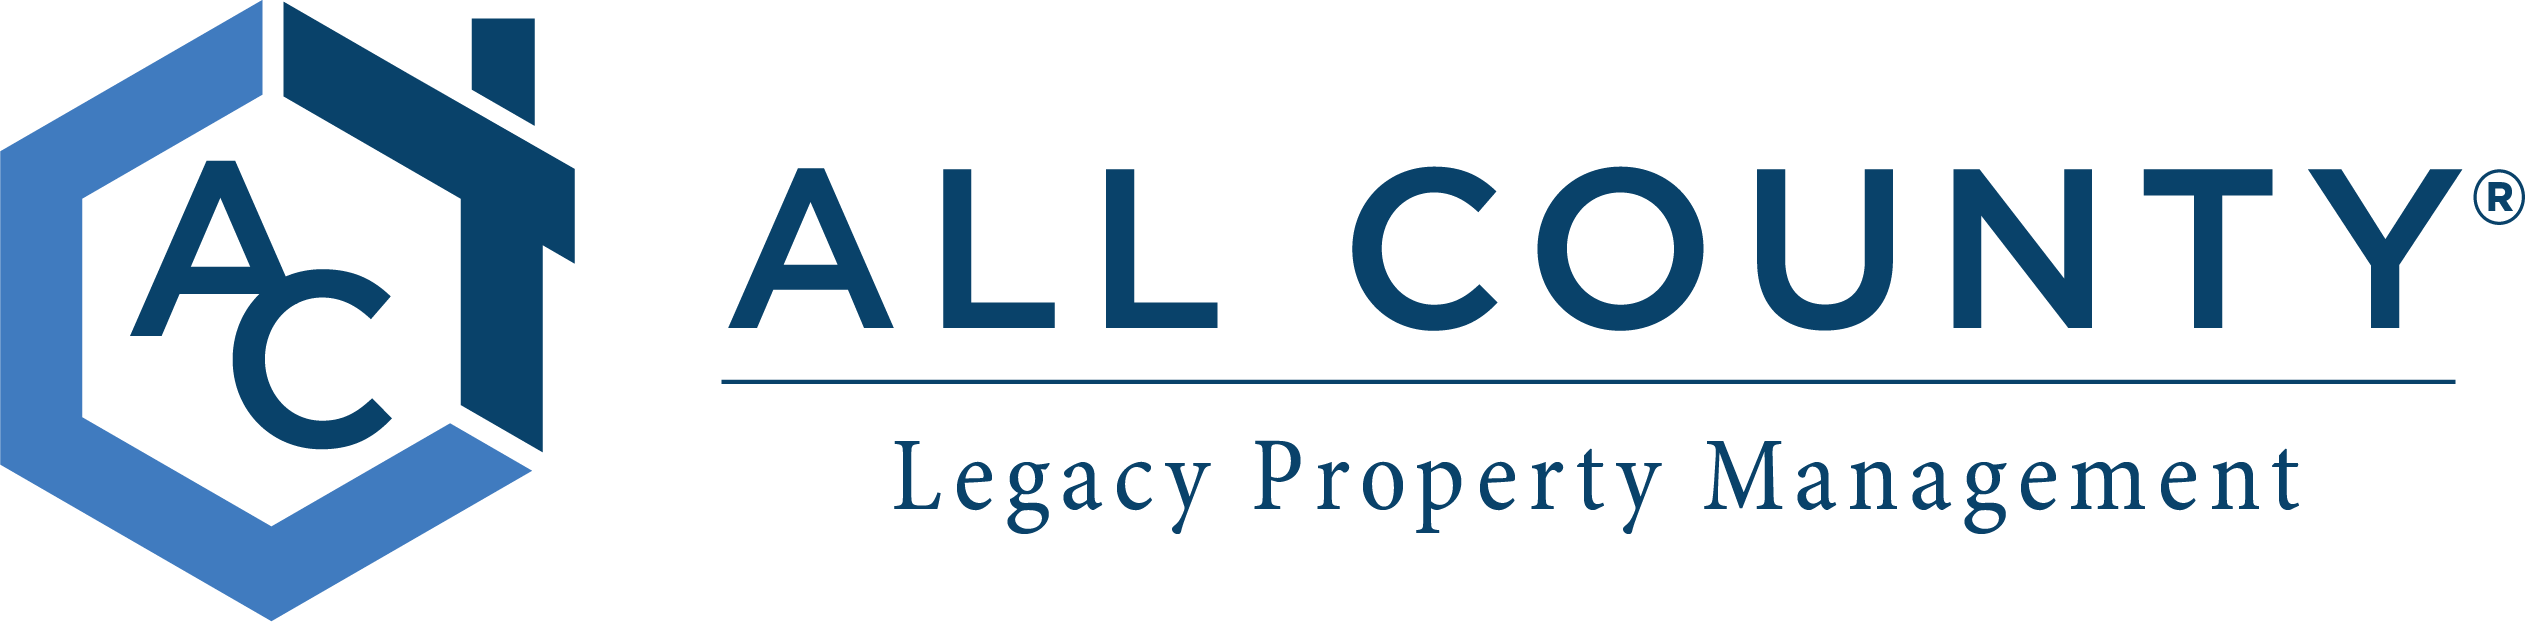 All County Legacy Property Management logo